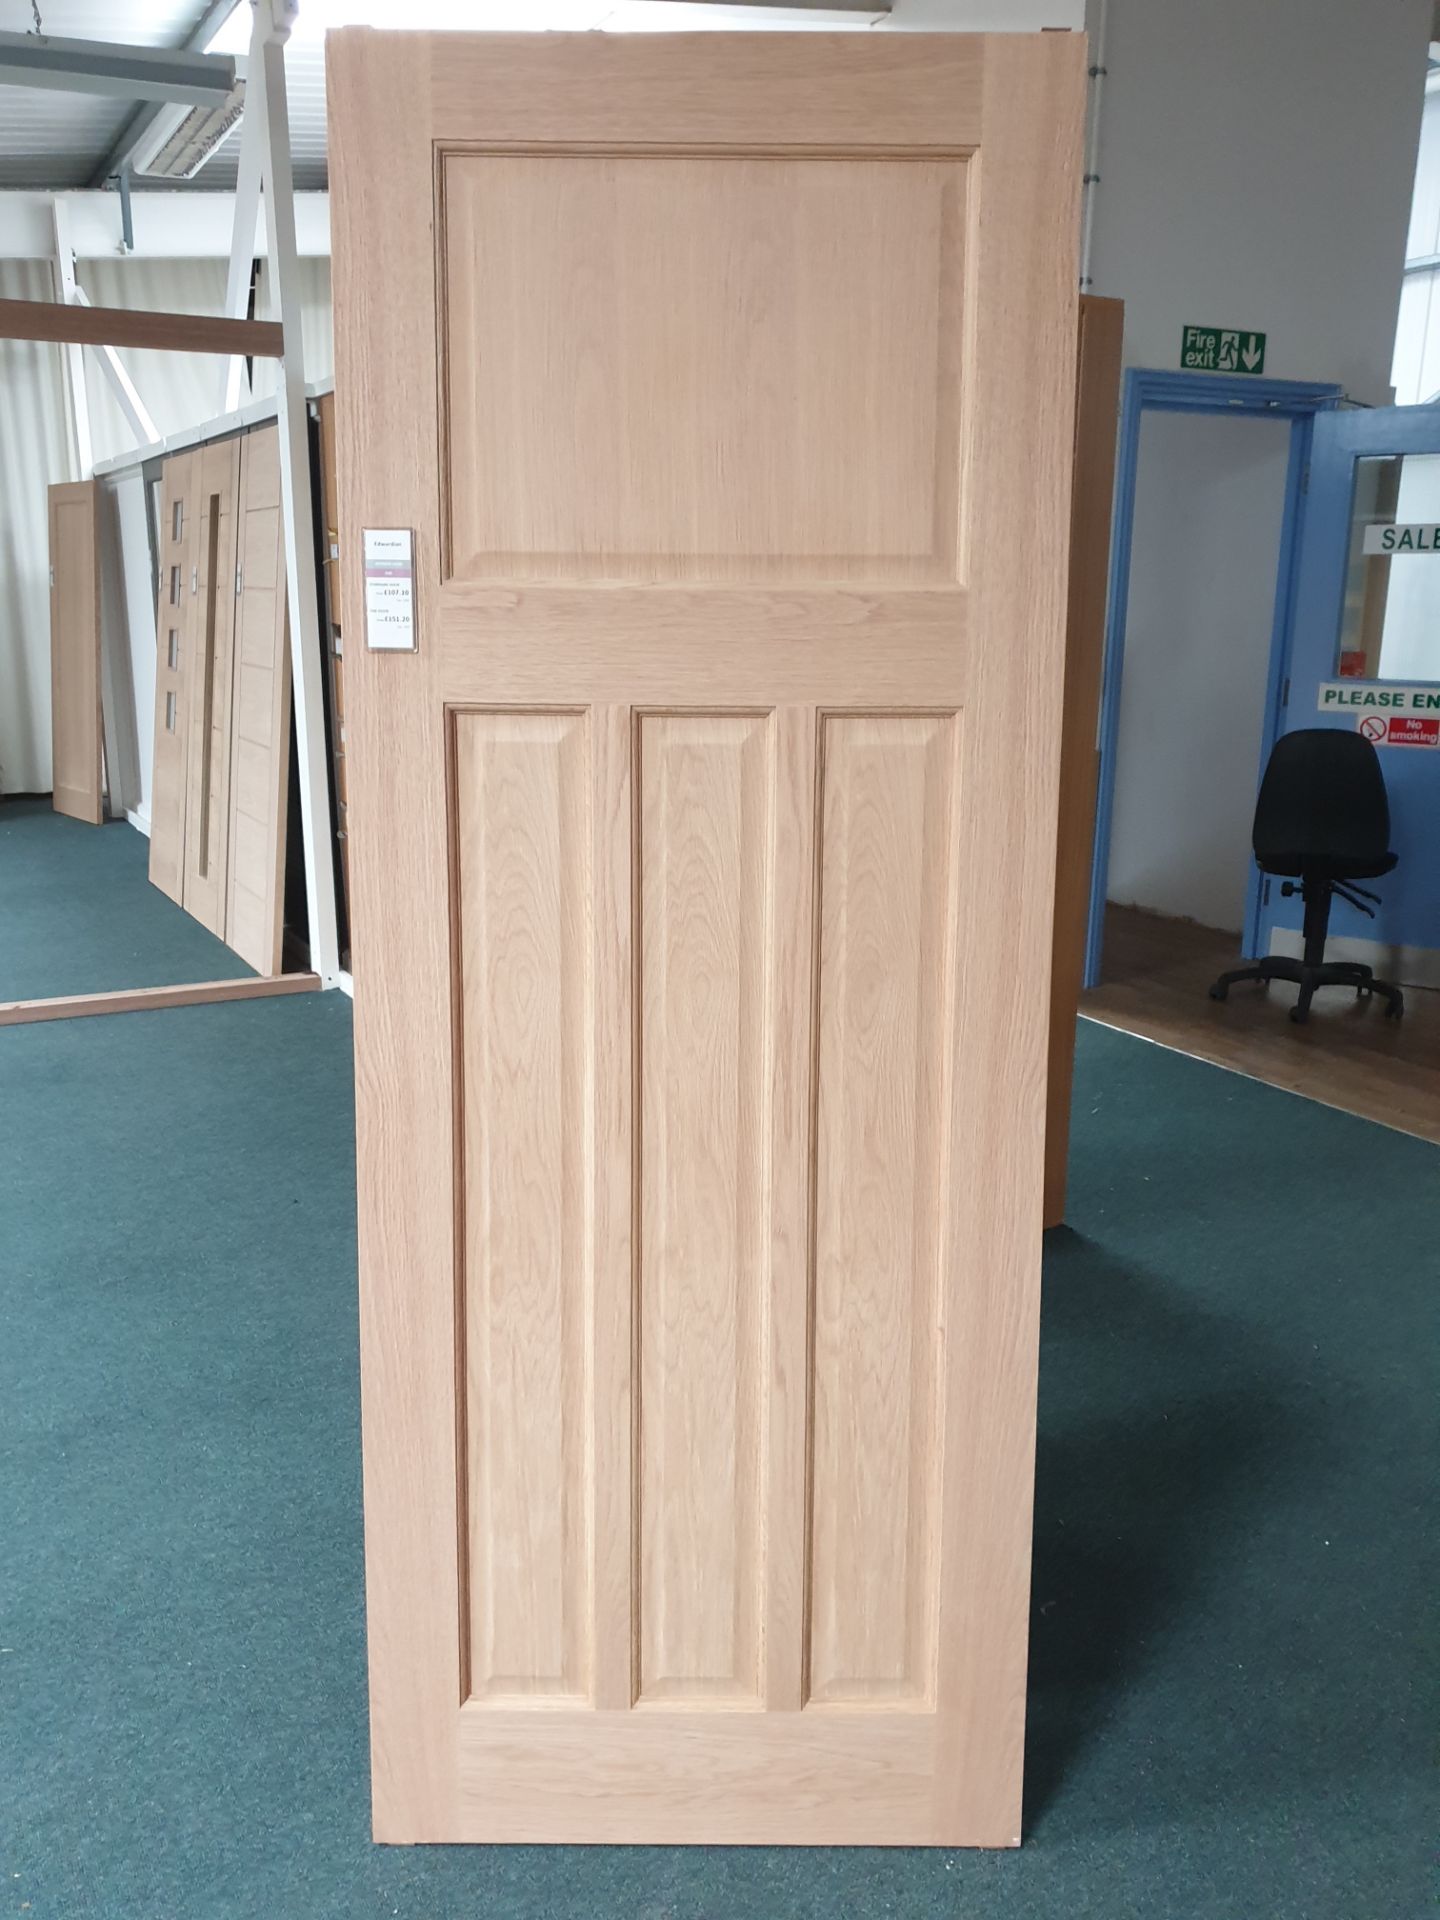 7x Edwardian 4 panel JAWOEDW24 Internal Door, 78” x 24” x 35mm - Lots to be handed out in order they